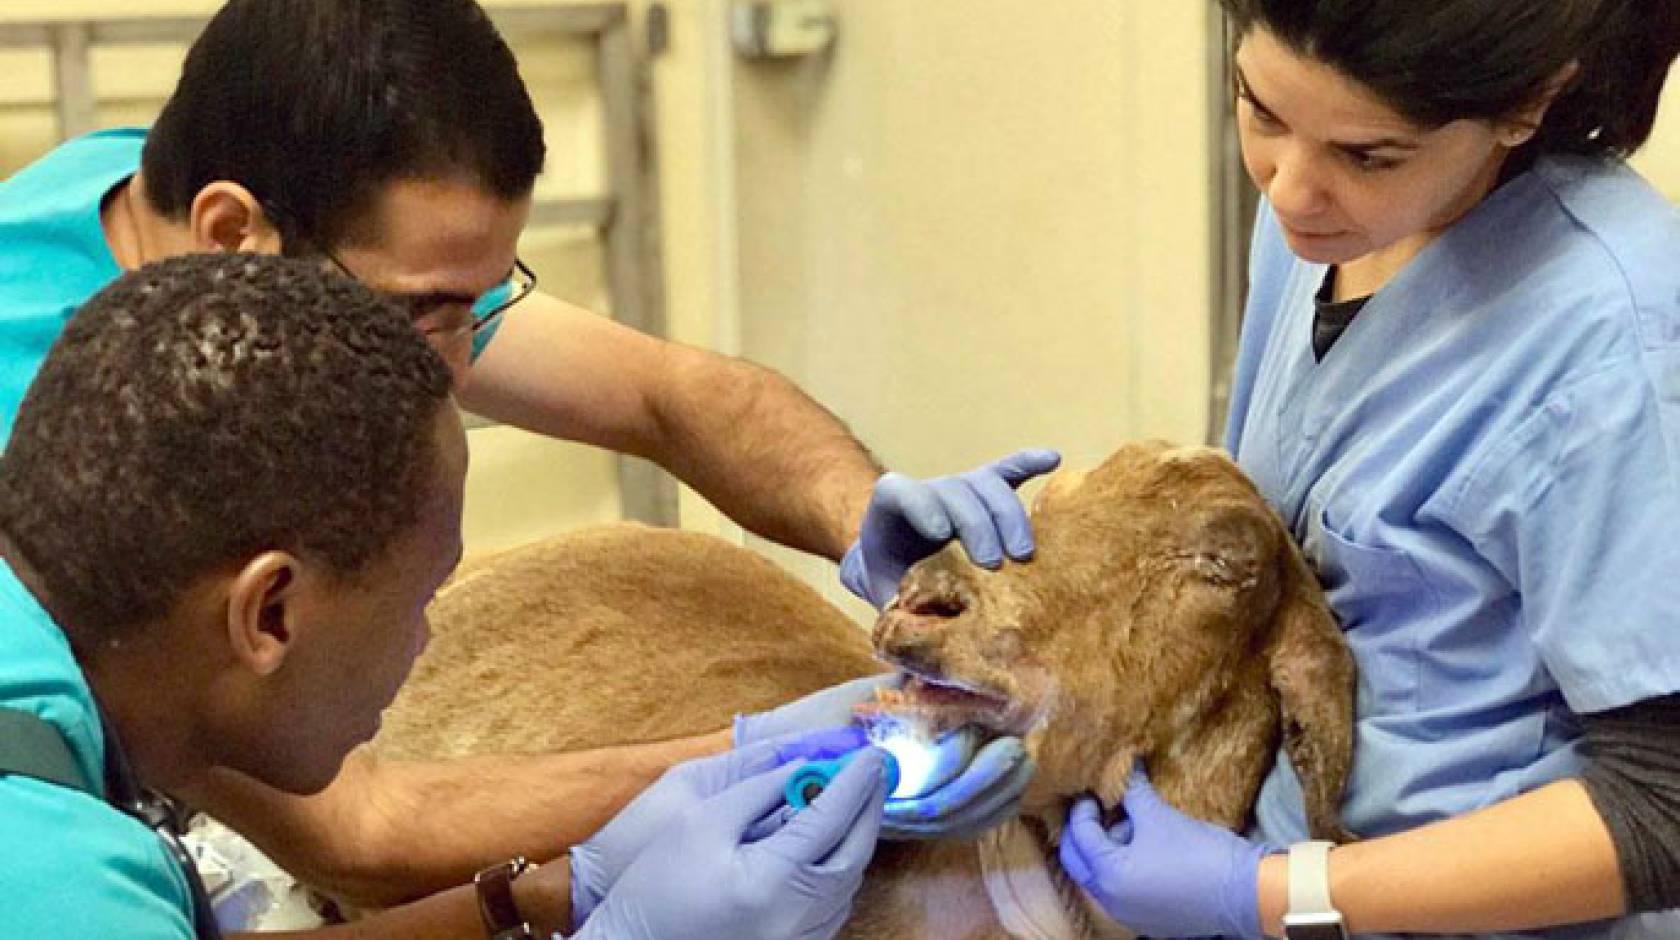 Three veterinary professionals work on an injured goat